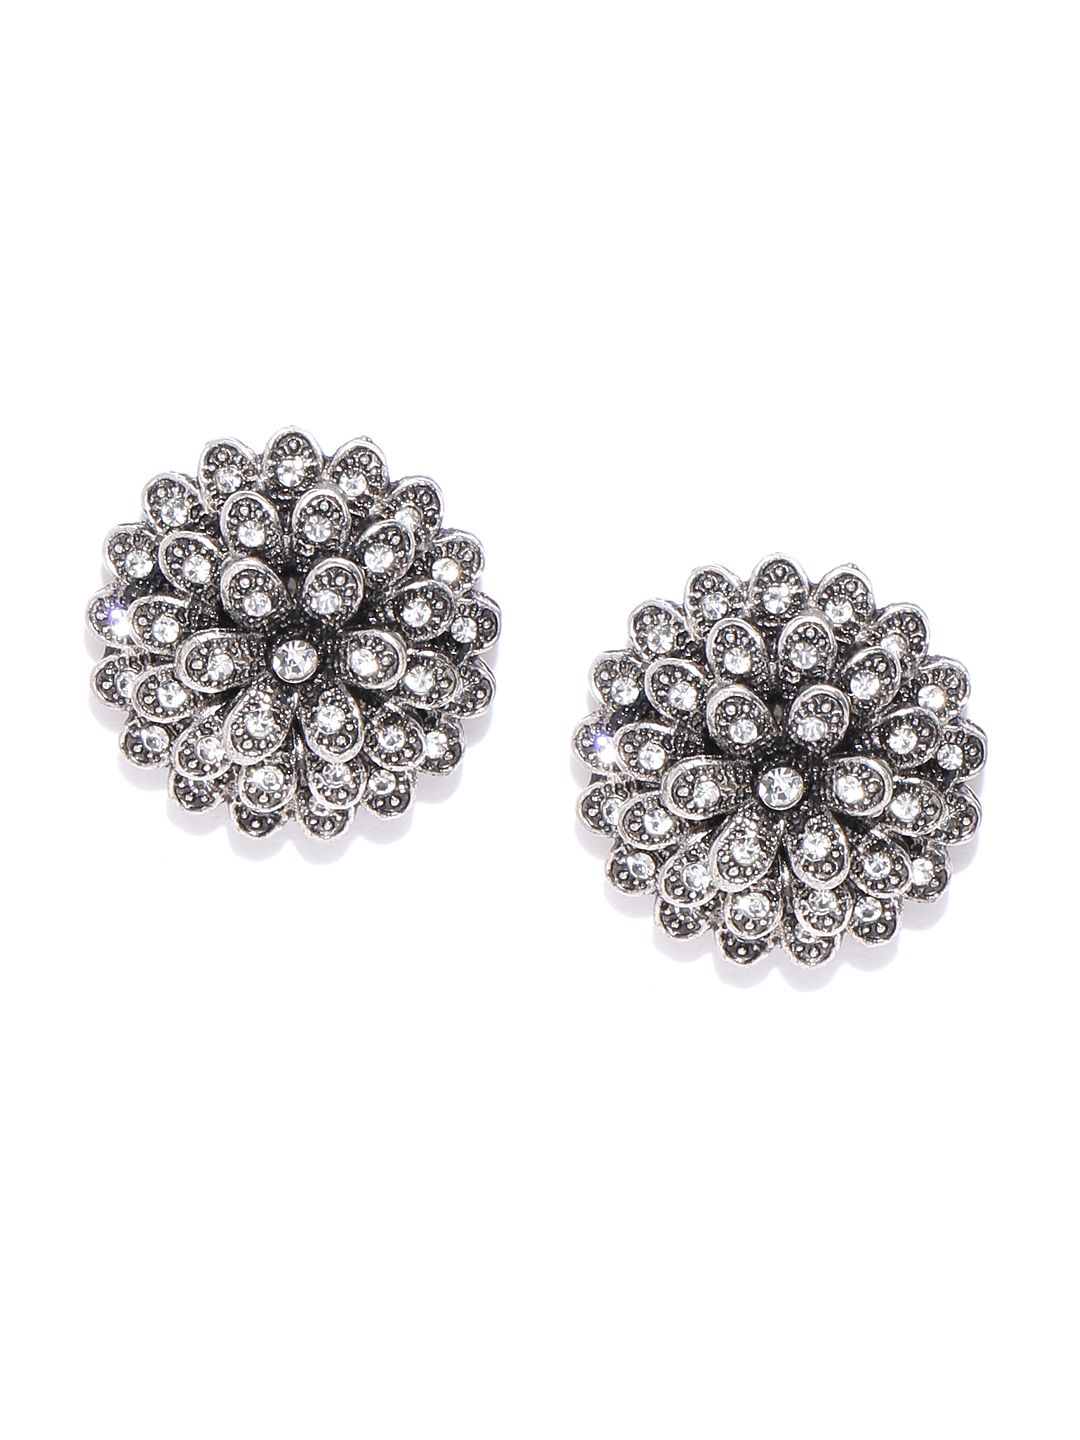 YouBella Oxidised Gunmetal-Toned Silver Plated Stone Studded Floral Studs Price in India